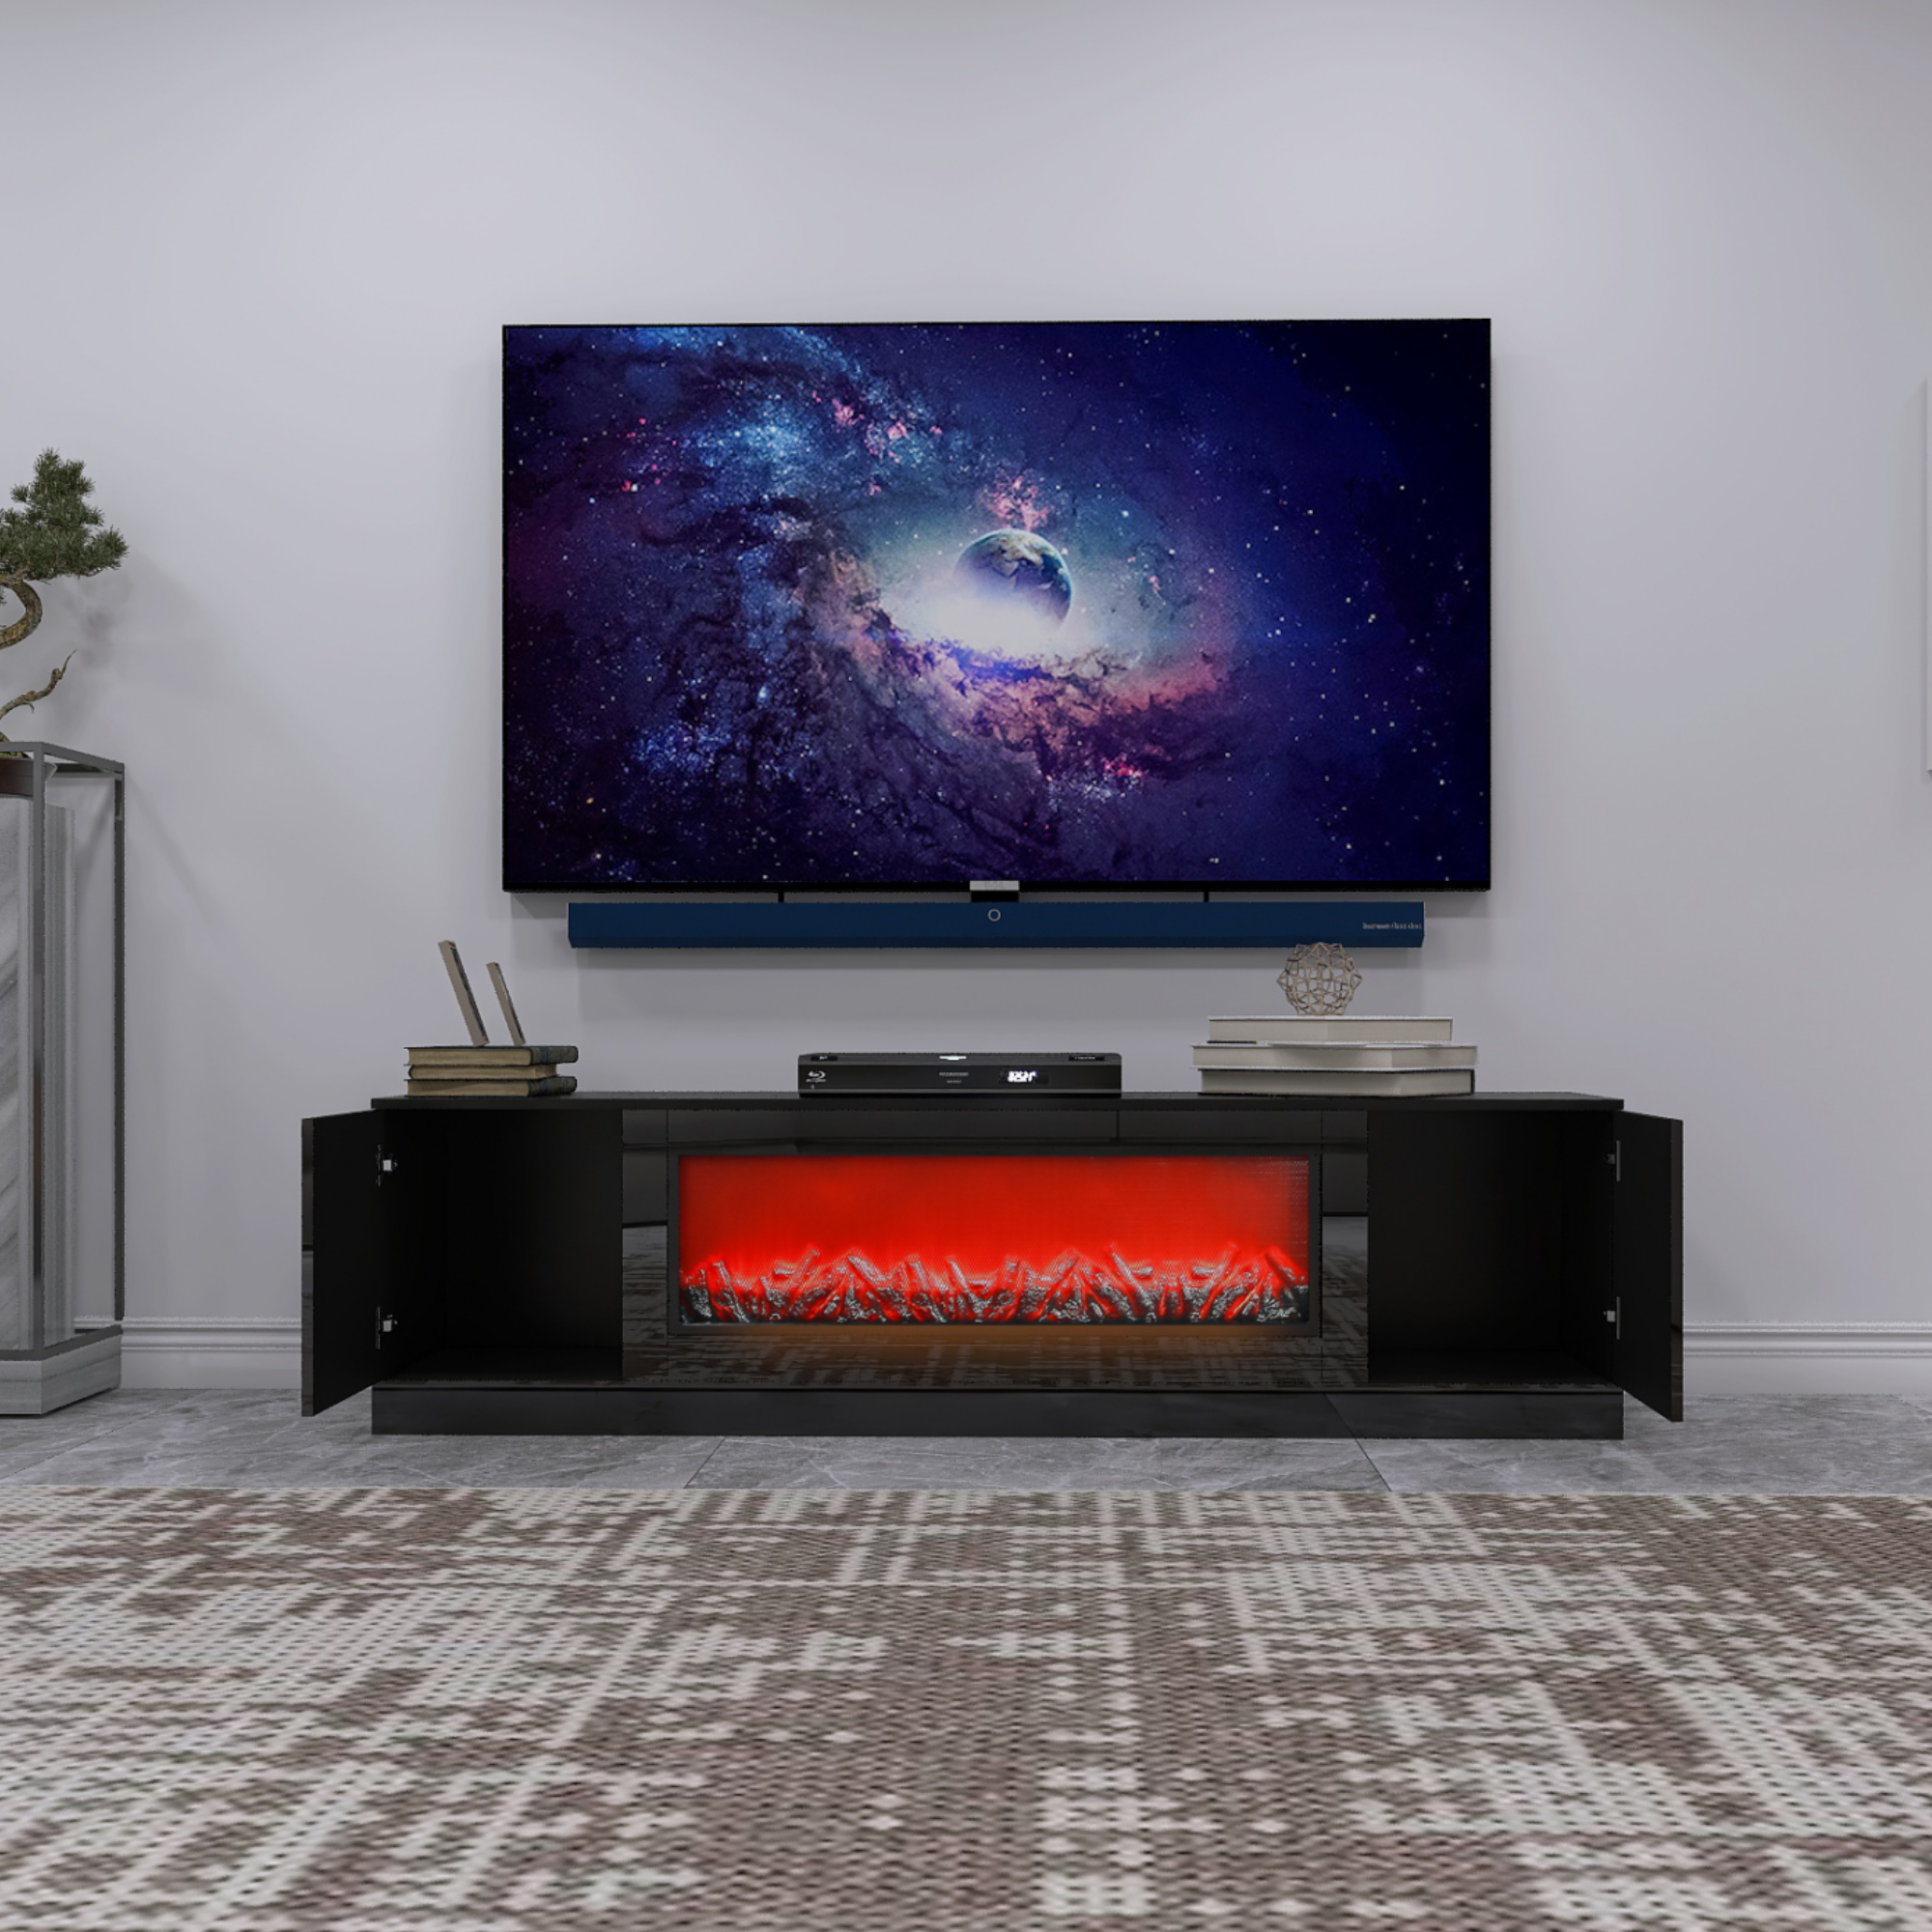 70.87" Black High Glossy Modern TV Stand With Insert Electric Fireplace, Fits TV Up to 75"